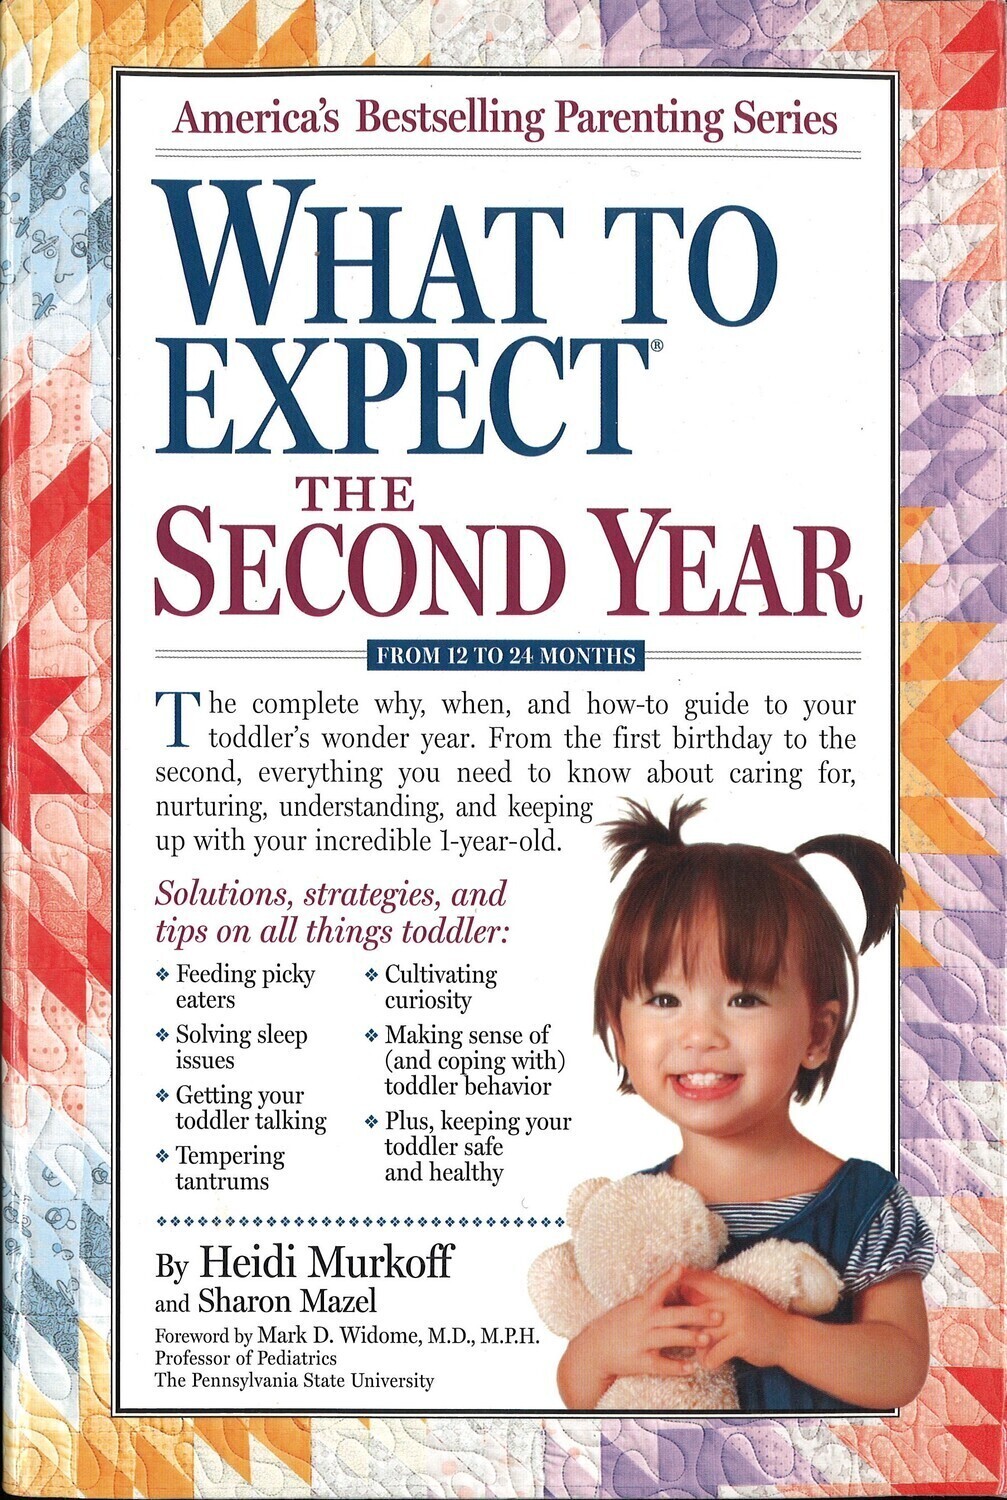 What to Expect The Second Year by Heidi Murkoff,